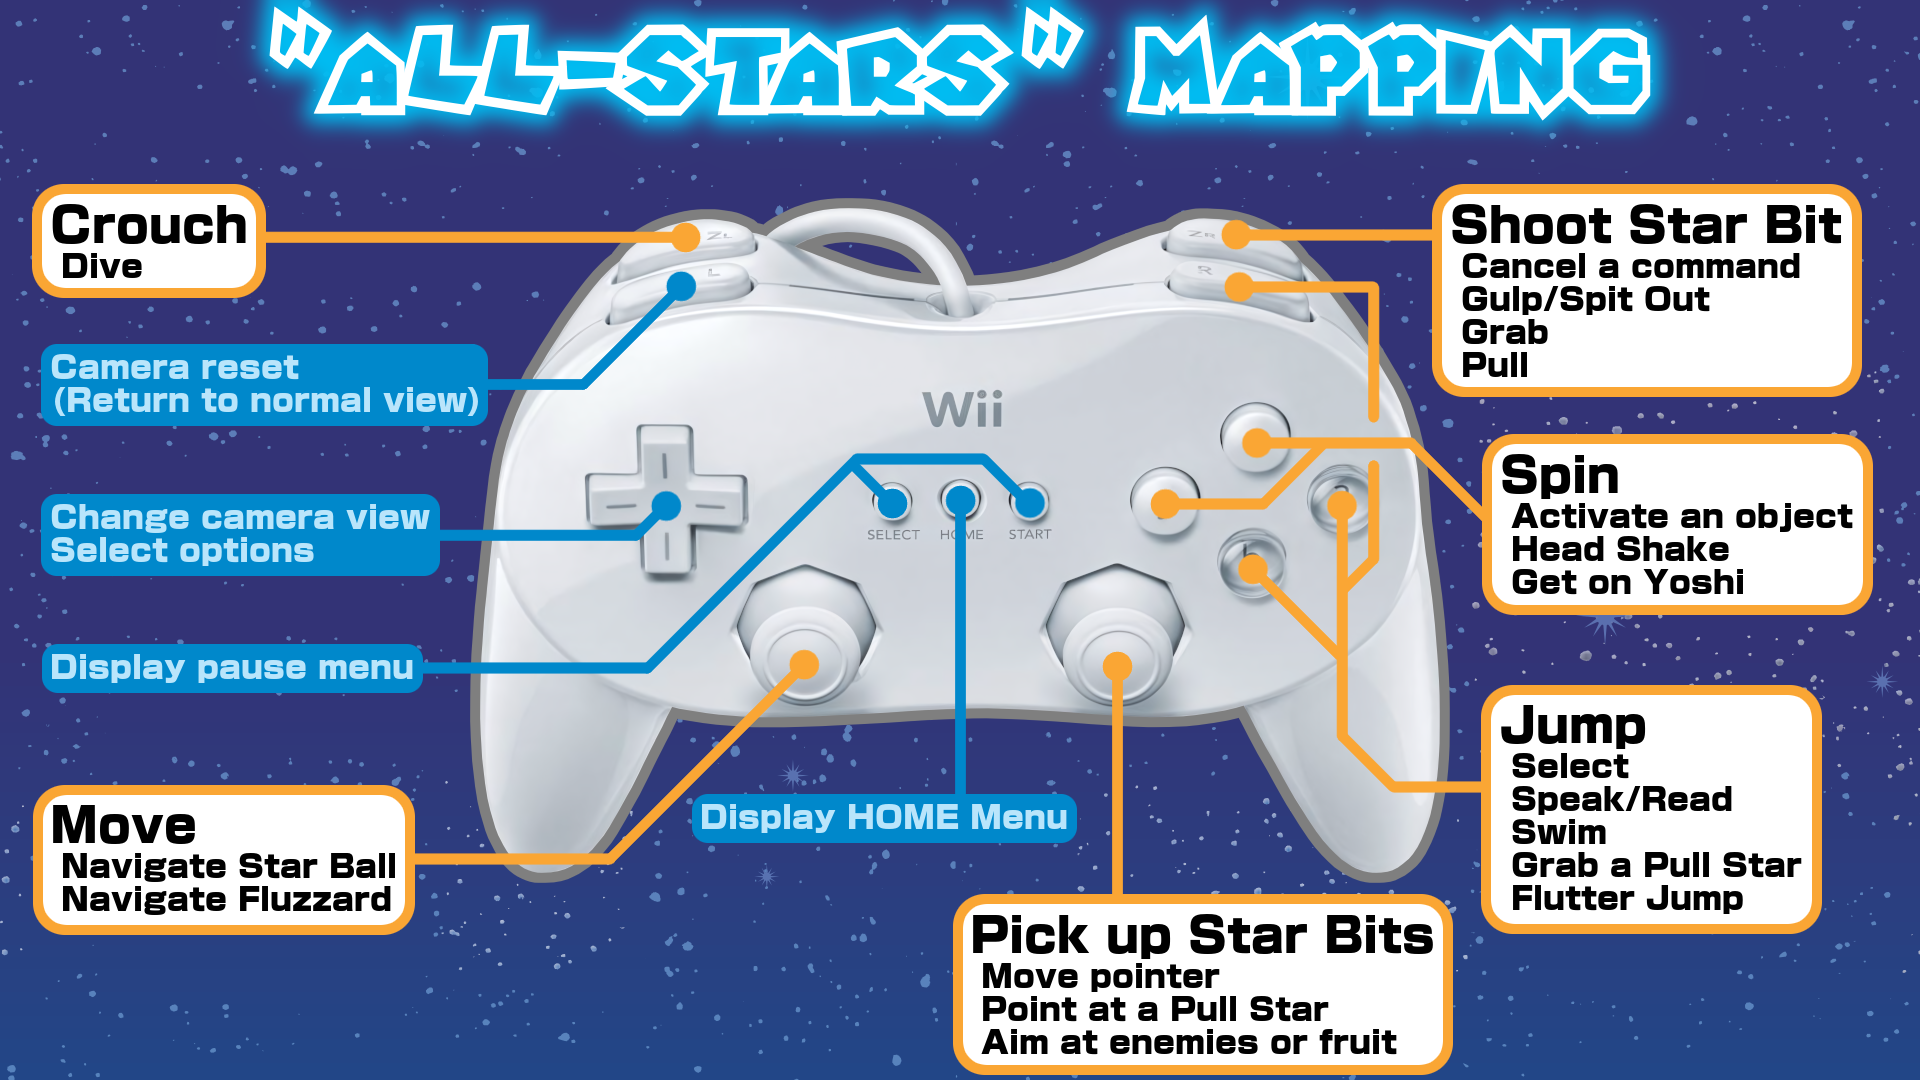 Play Super Mario Galaxy 2 using the Wii U GamePad | Page 3 | GBAtemp.net -  The Independent Video Game Community